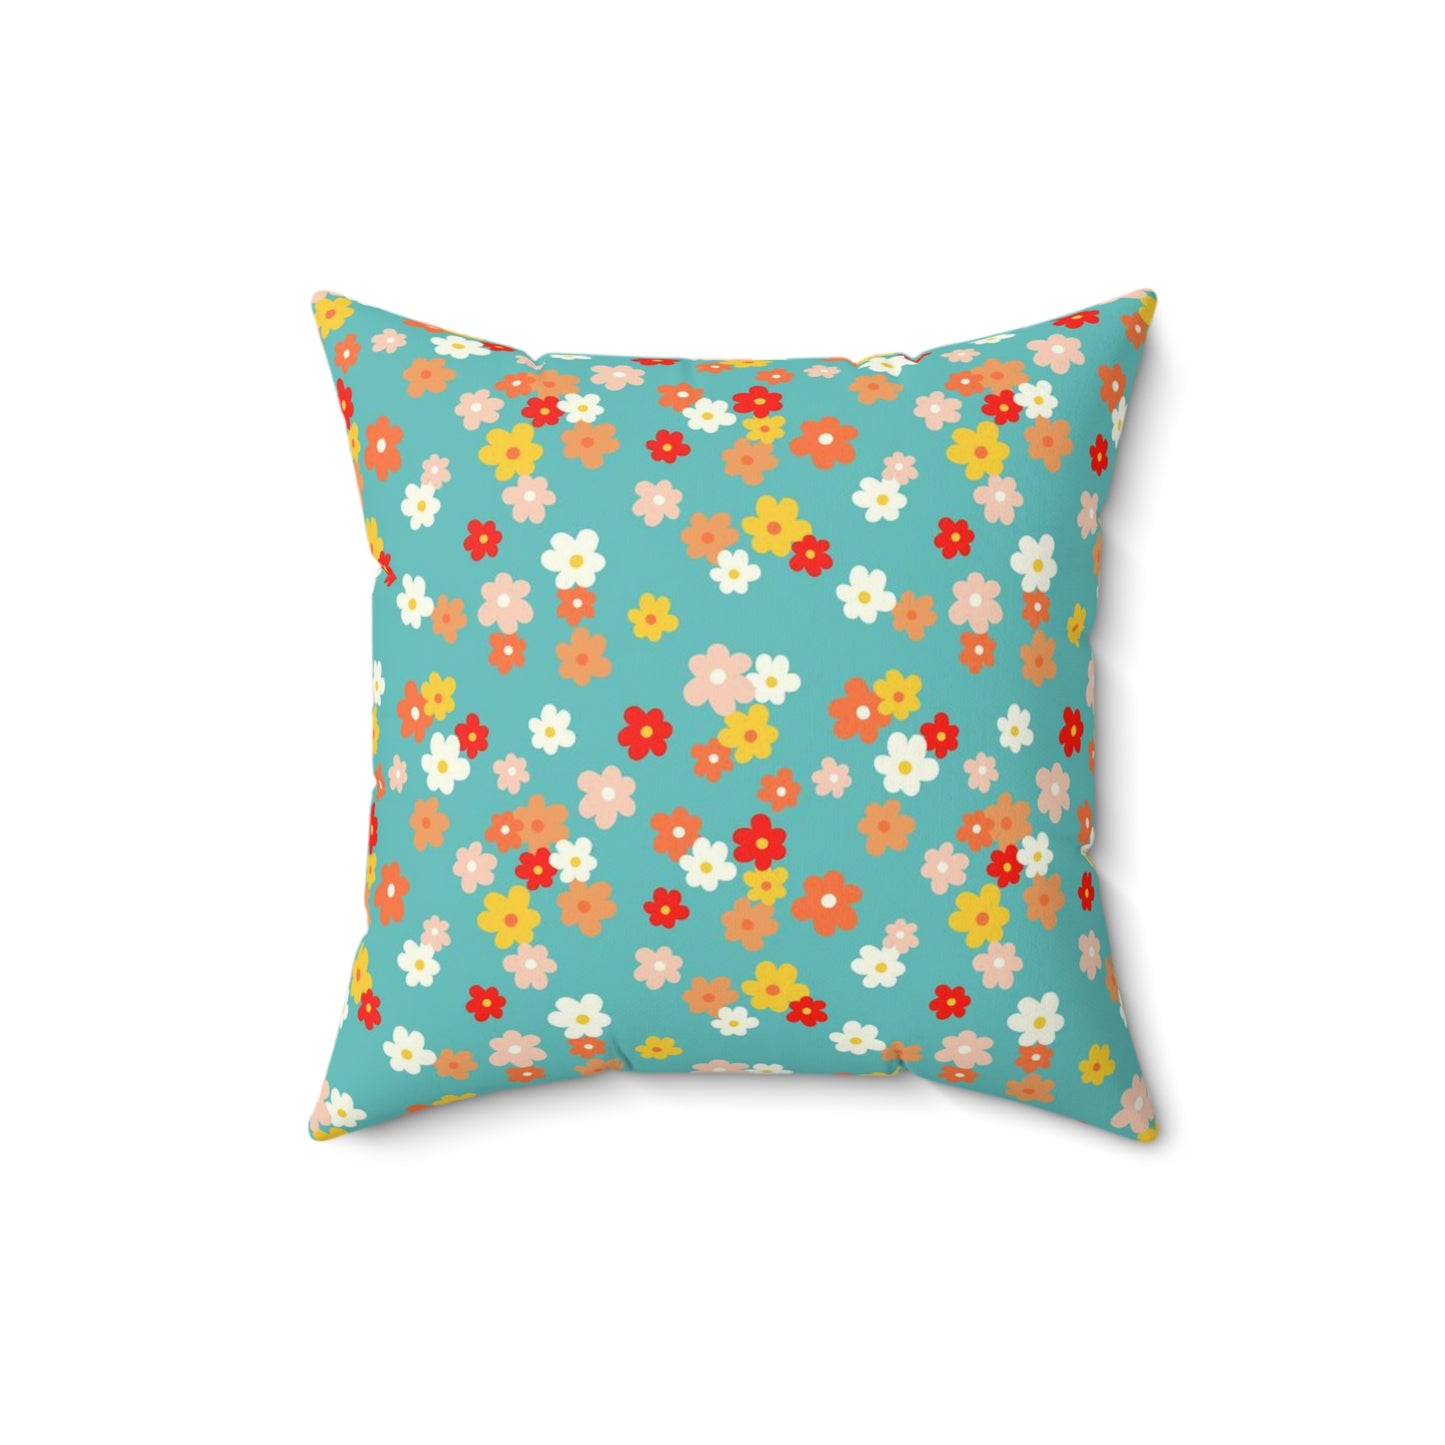 Ditzy Daisies Spun Polyester Square Pillow